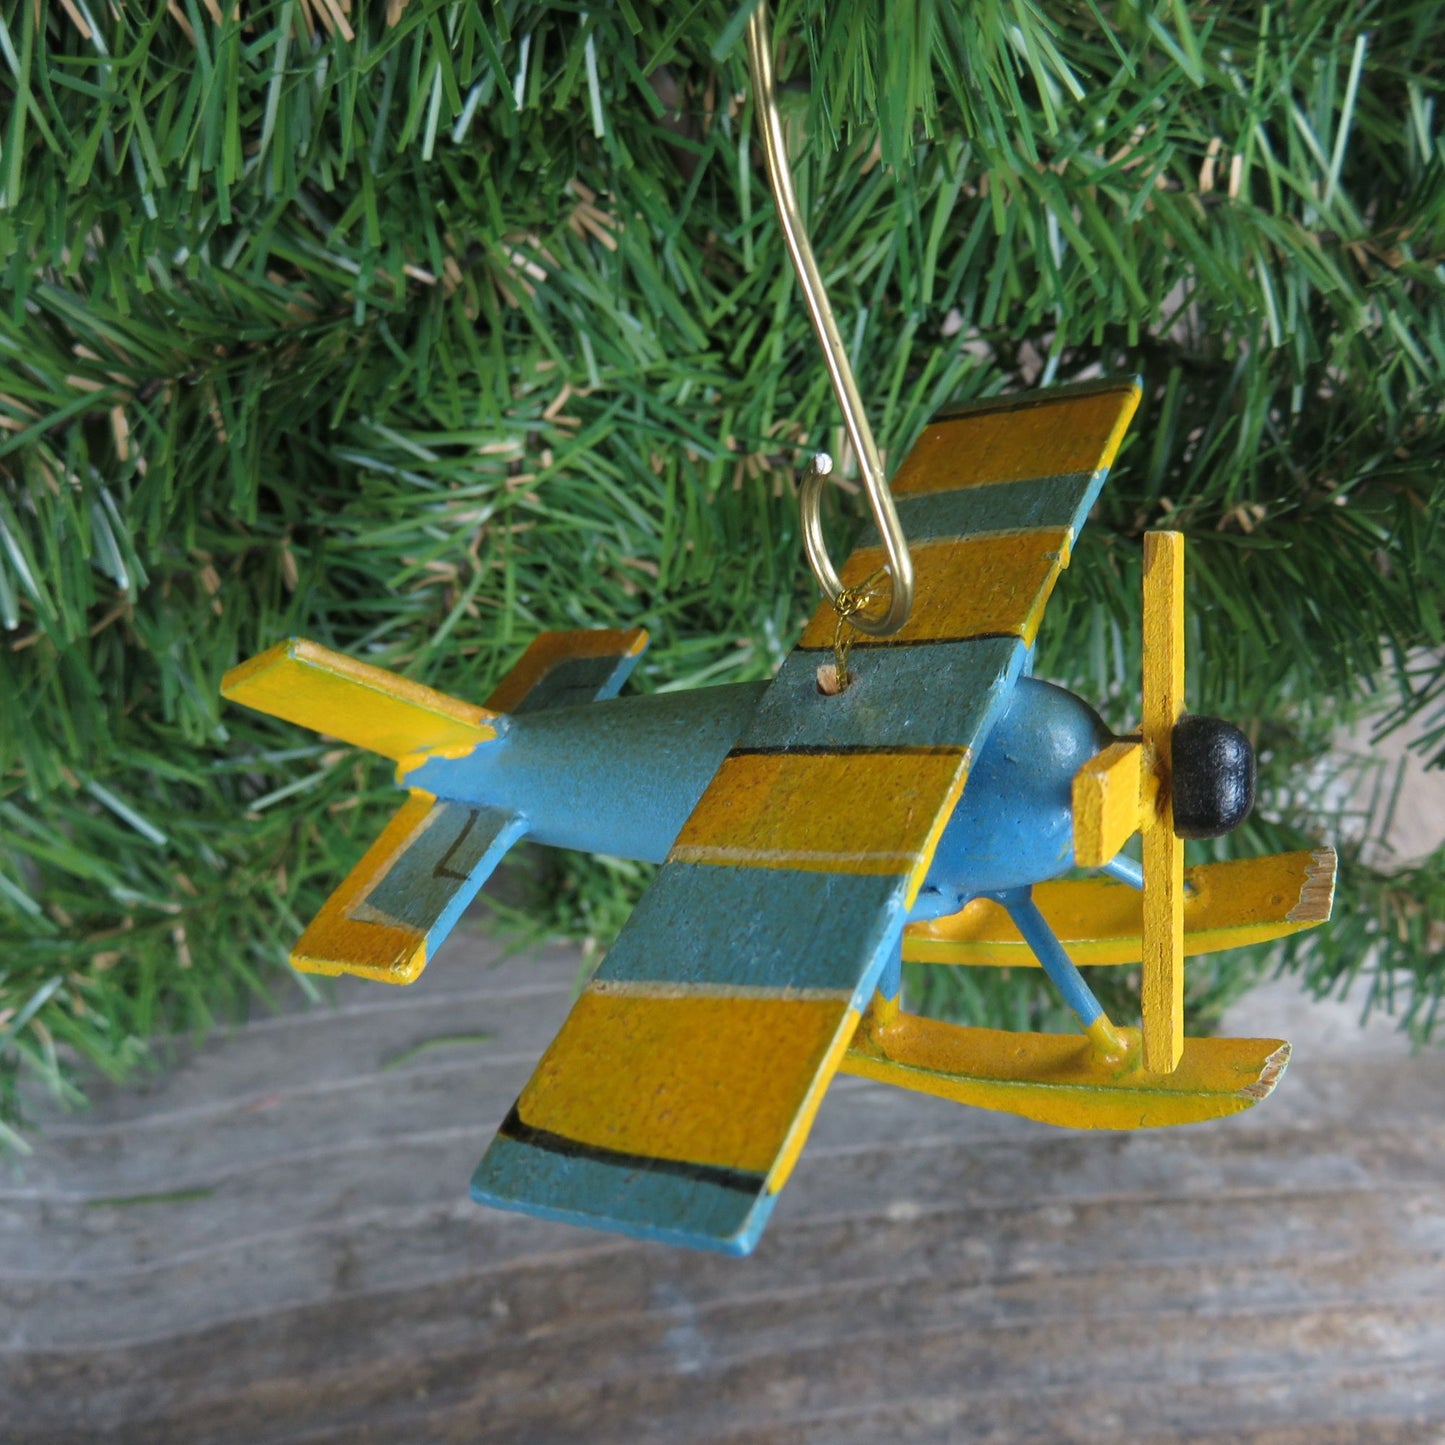 Vintage Blue and Yellow Airplane Ornament Wooden Seaplane Biplane Christmas Ornament